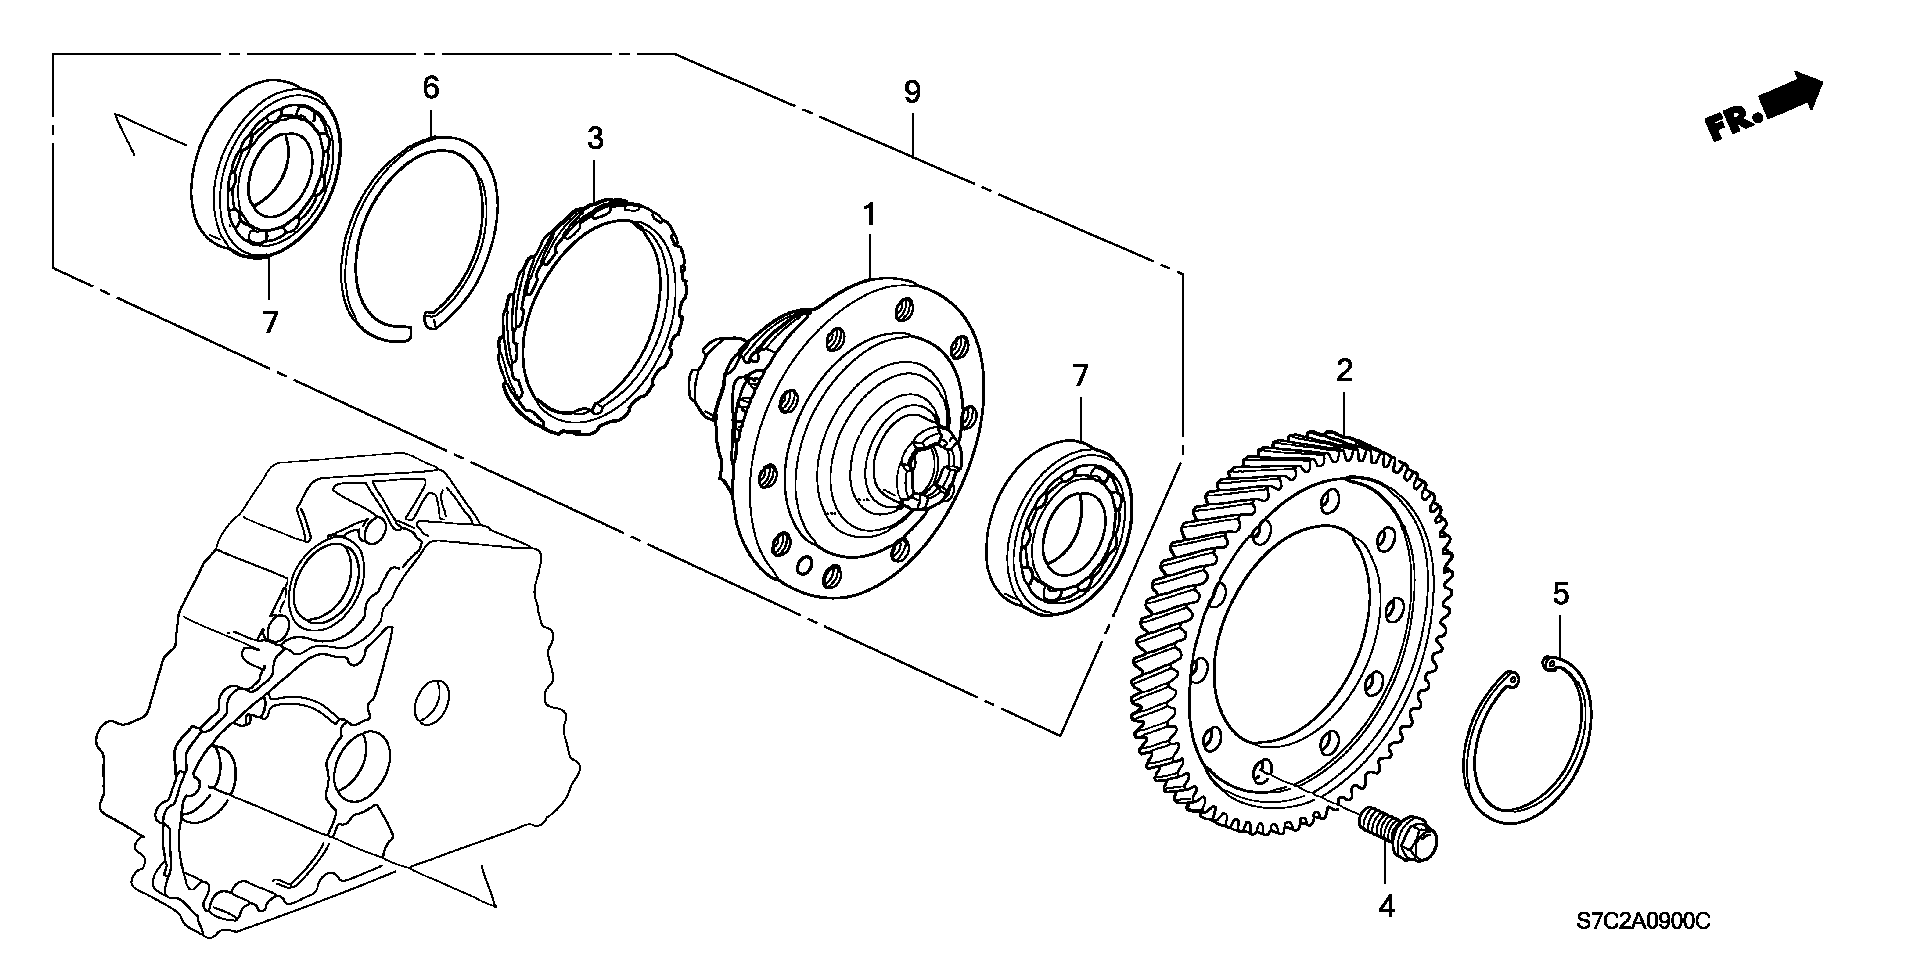 DIFFERENTIAL(2WD) (1.7L)